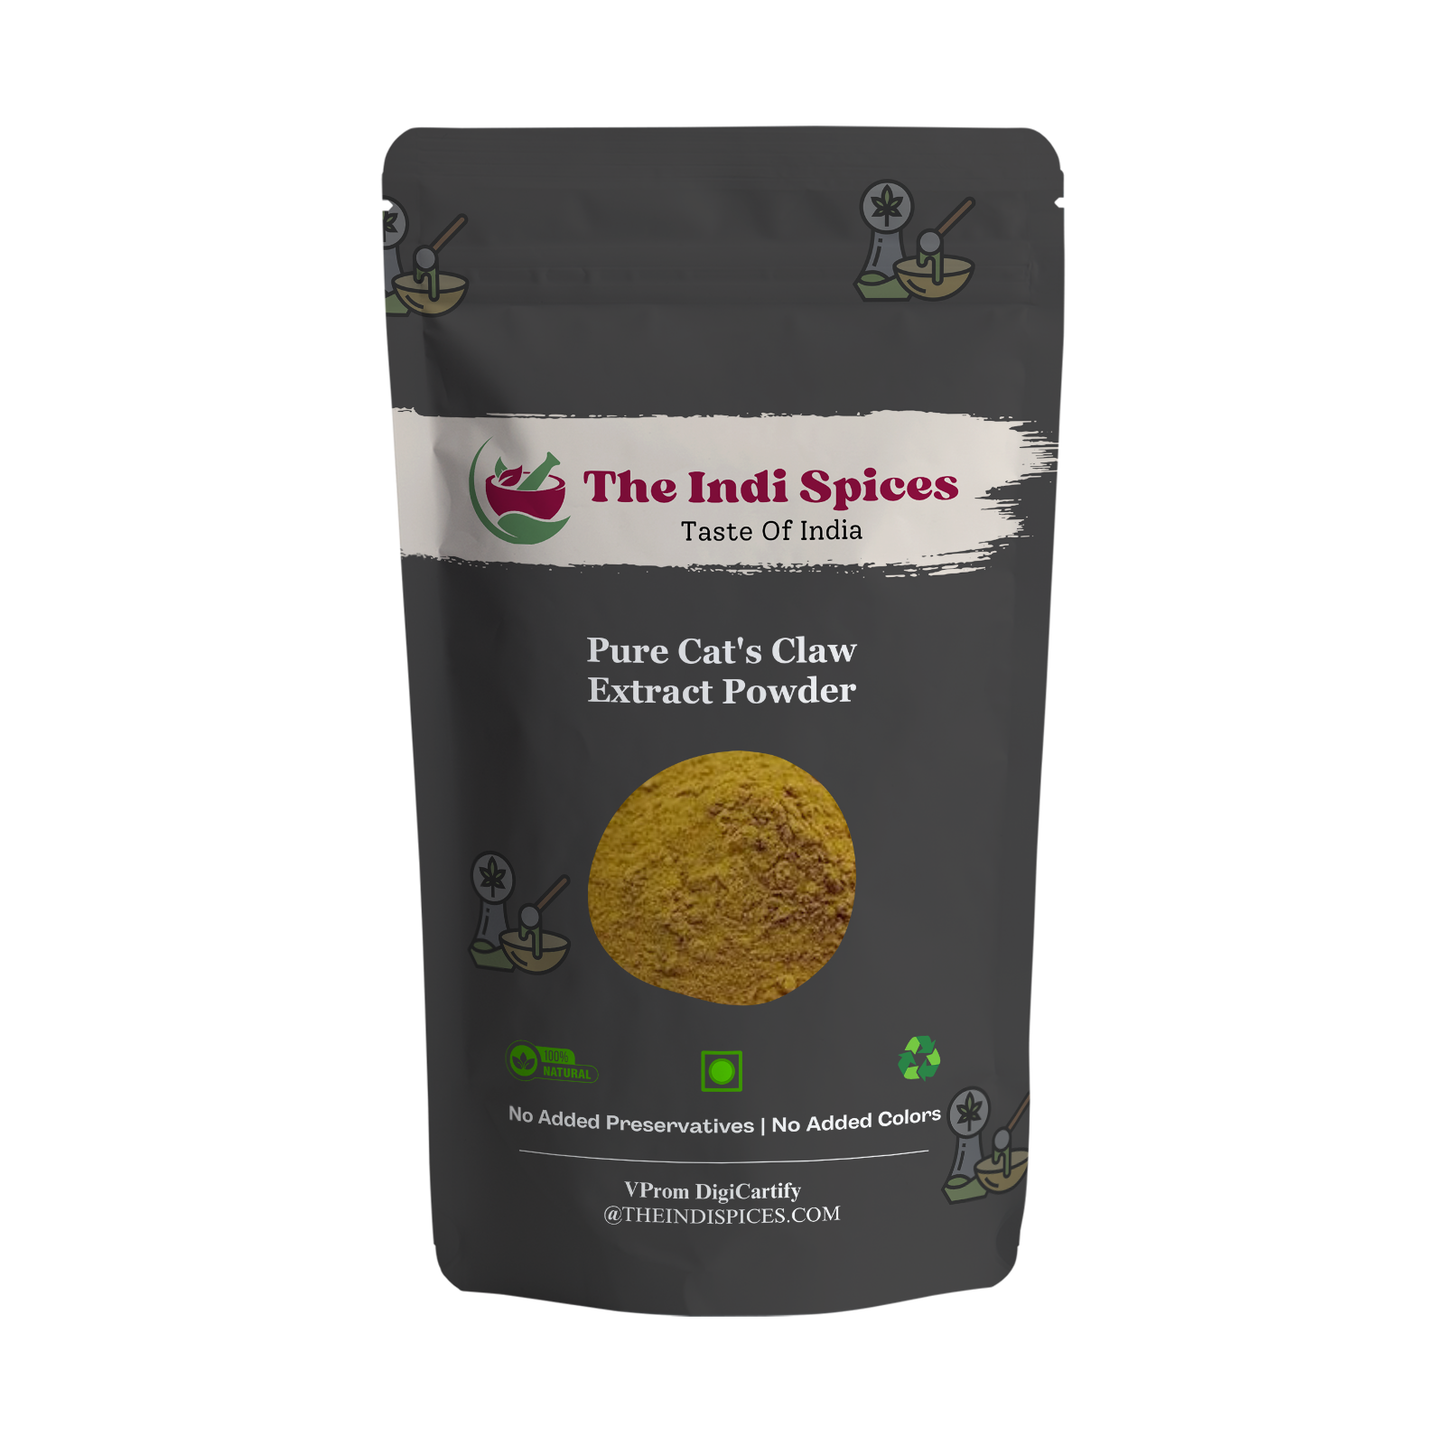 Pure Cat's Claw Extract Powder